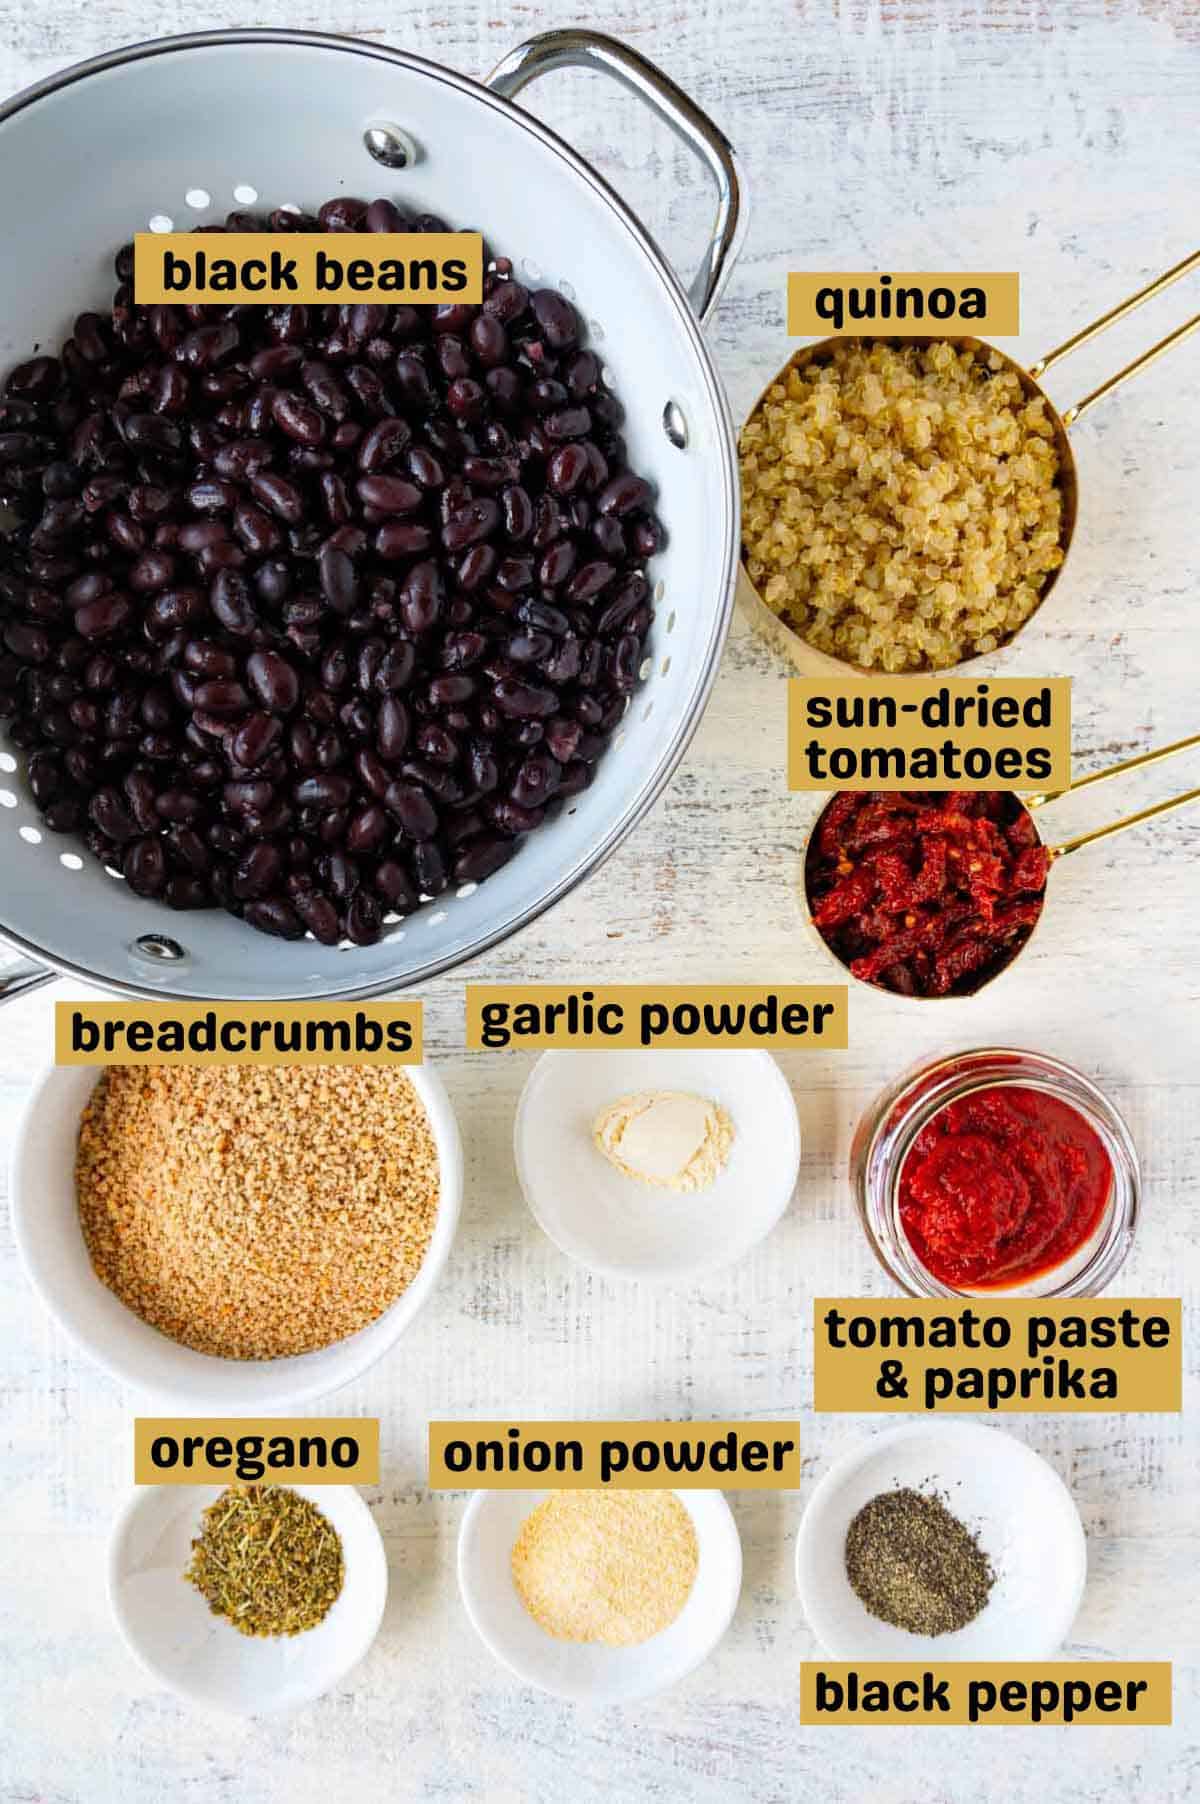 Black beans in a white colander, quinoa in a gold measuring cup, sun-dried tomatoes in a gold measuring cup, garlic powder, onion powder, oregano, breadcrumbs, and tomato paste in white bowls on a white backdrop.